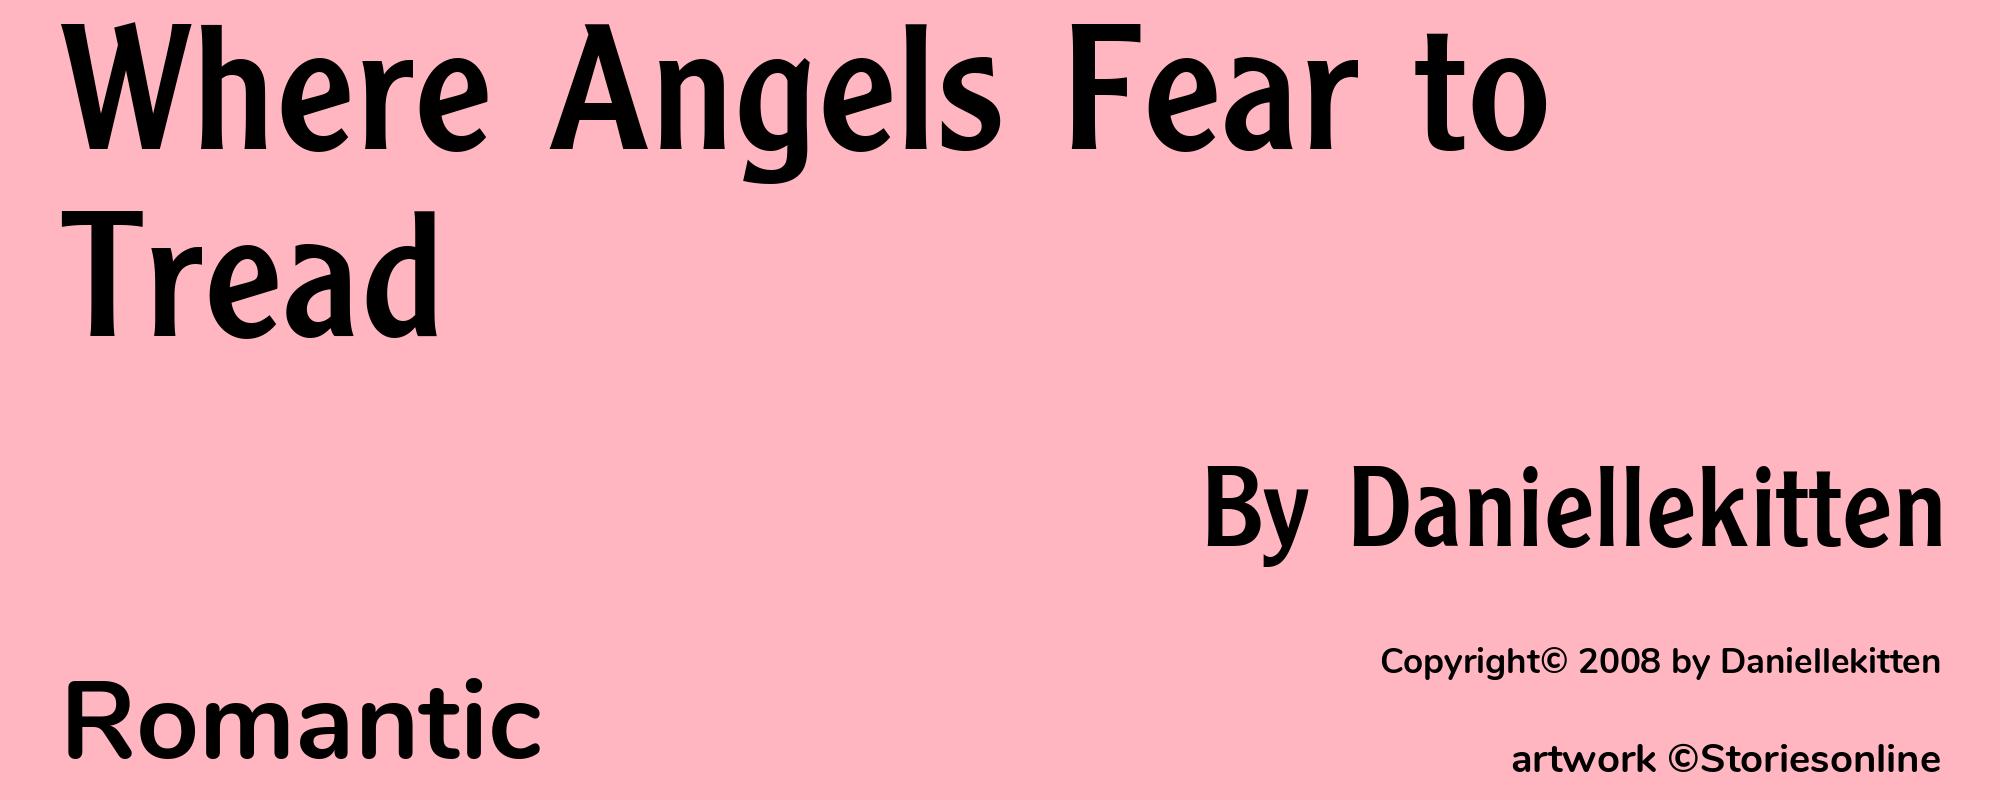 Where Angels Fear to Tread - Cover